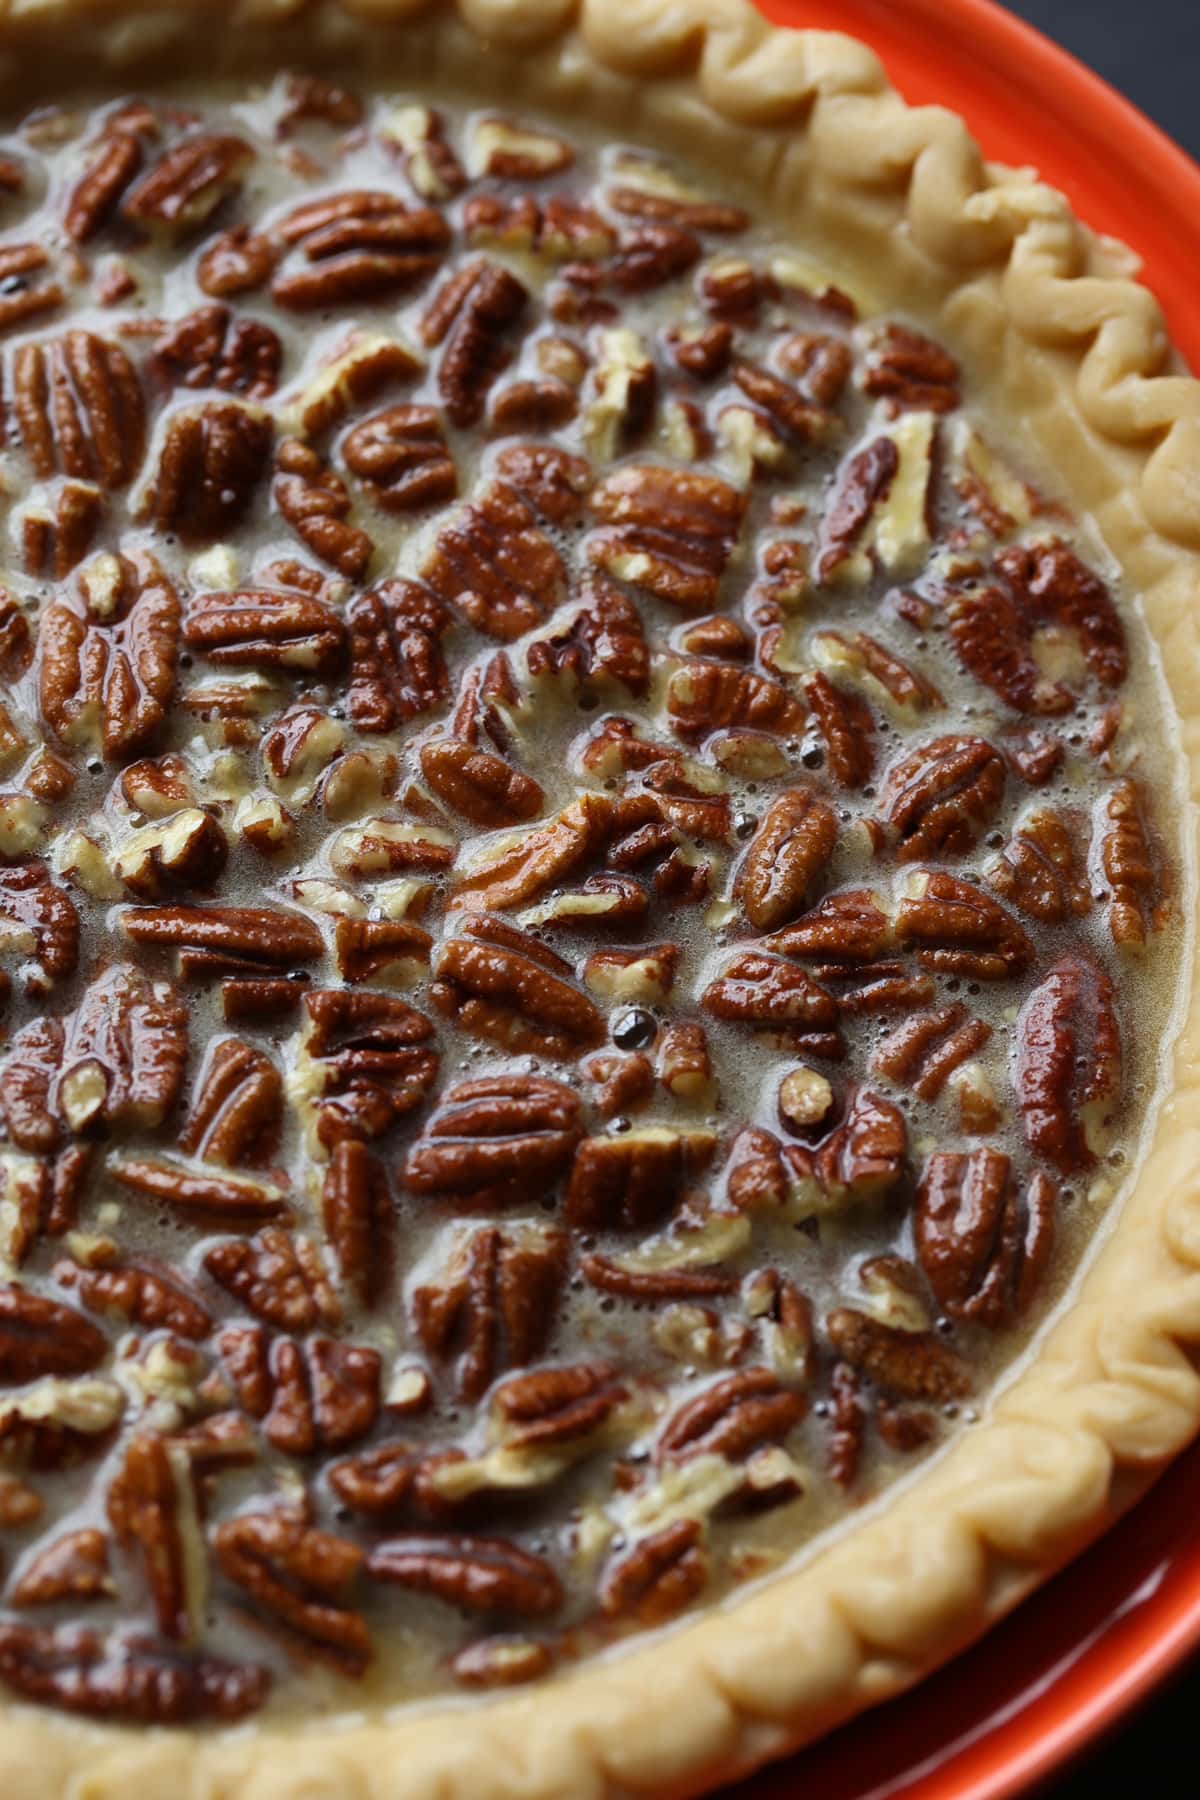 Pecan Pie filling in an unbaked pie shell before going into the oven